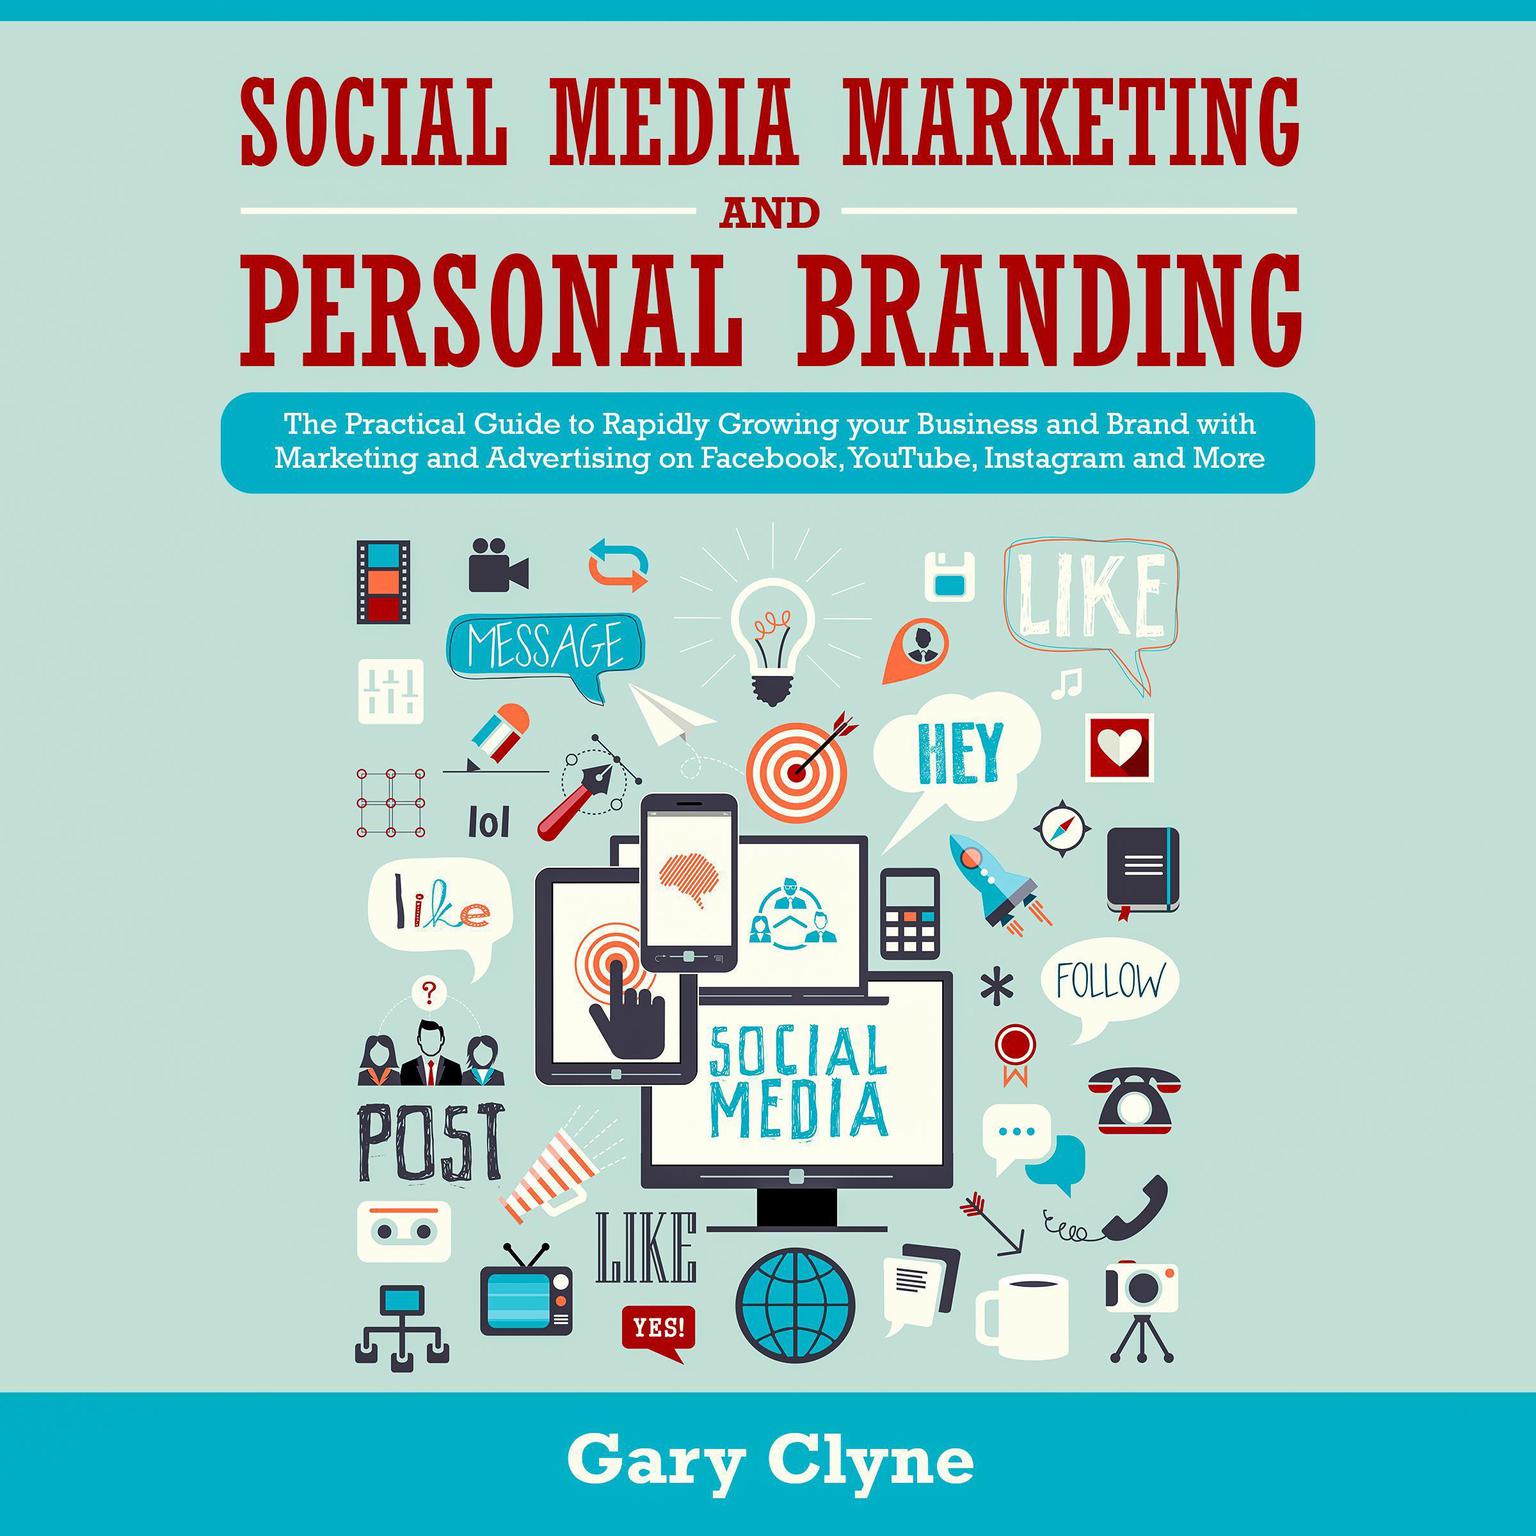 Social Media Marketing and Personal Branding Bible: The Practical Guide to Rapidly Growing your Business and Brand with Marketing and Advertising on Facebook, YouTube, Instagram and More Audiobook, by Gary Clyne